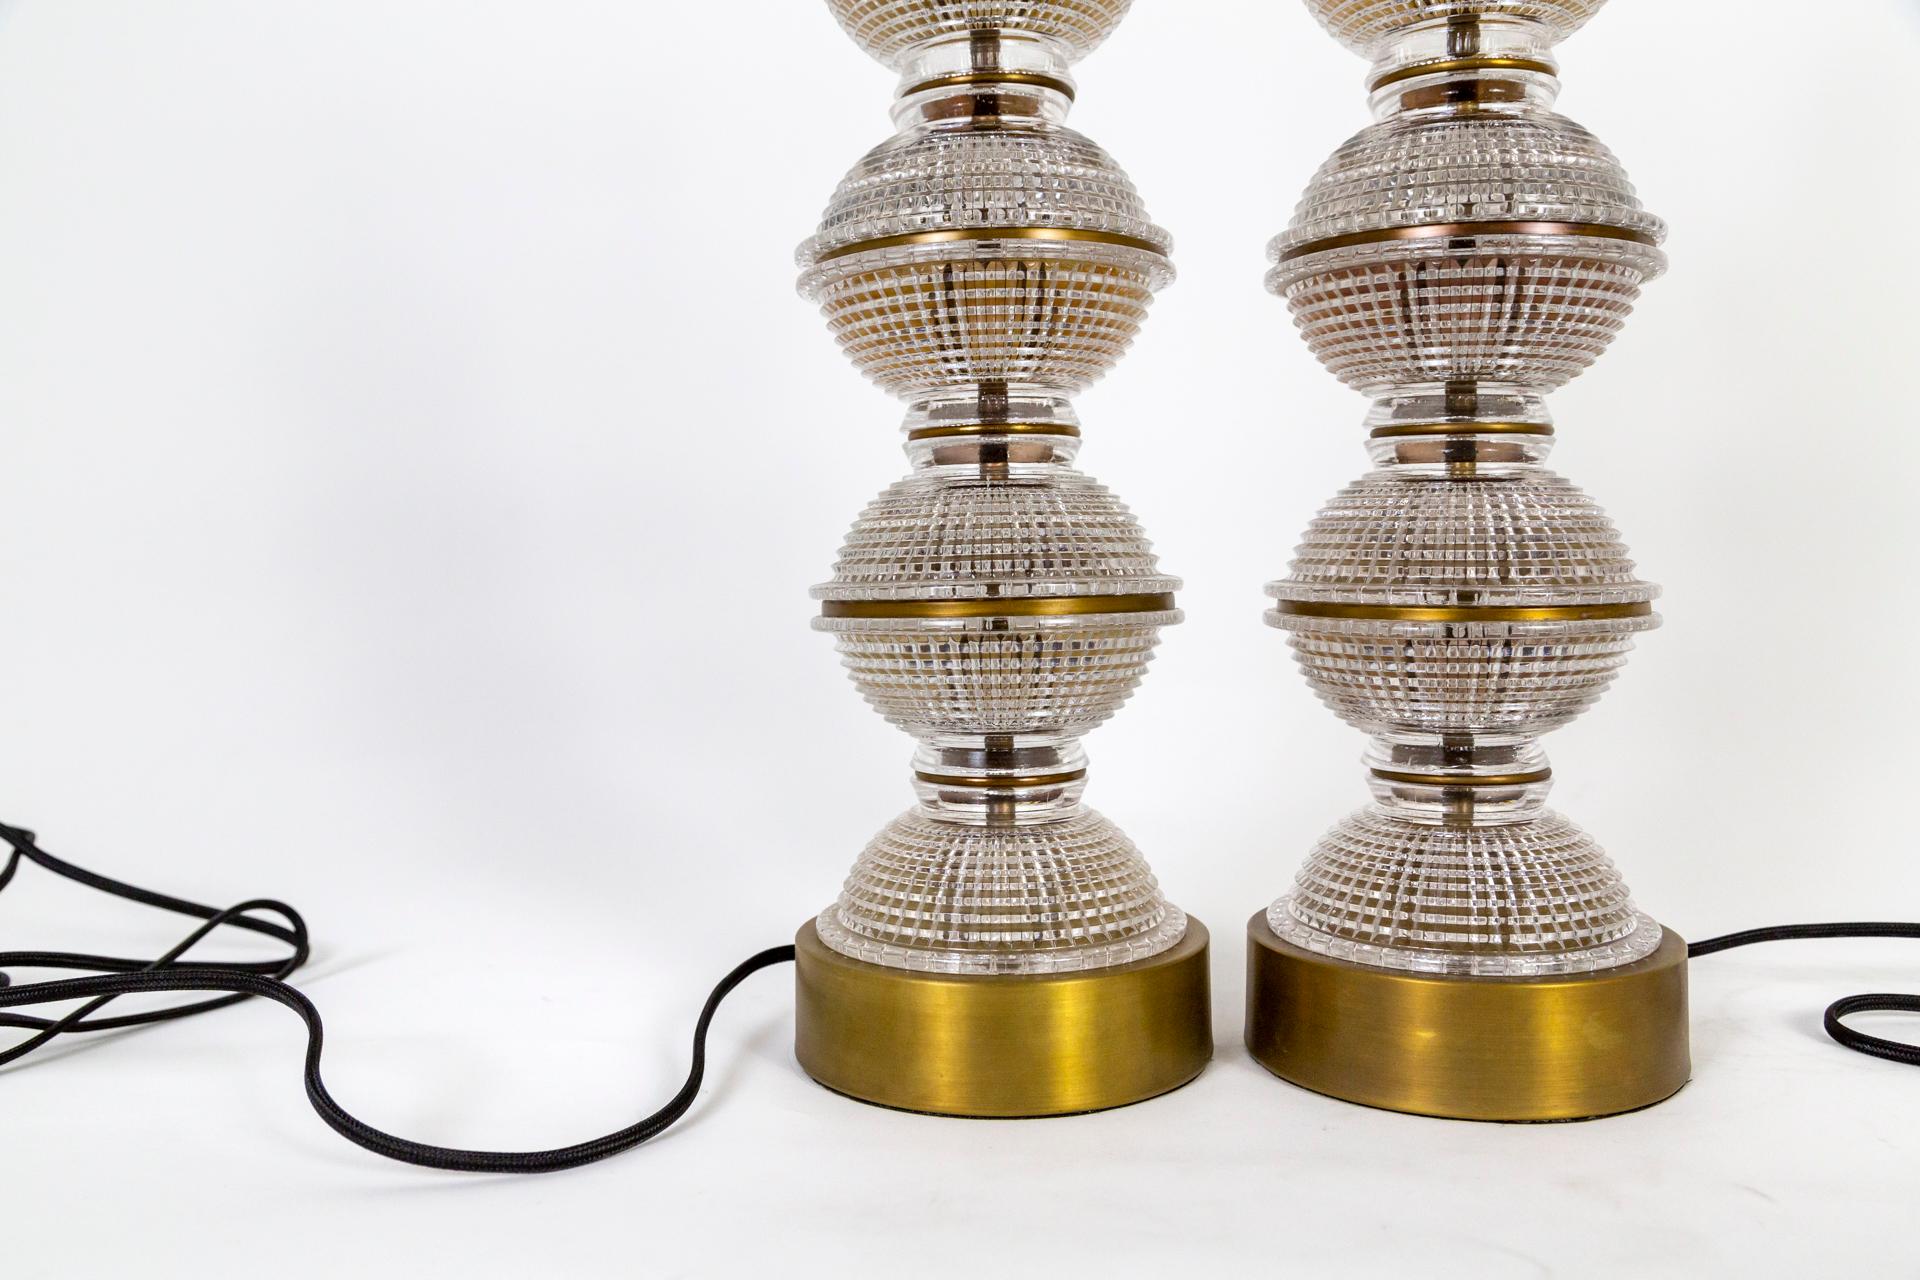 Contemporary Stacked Quilted Glass Spheres Lamps, 'Pair'